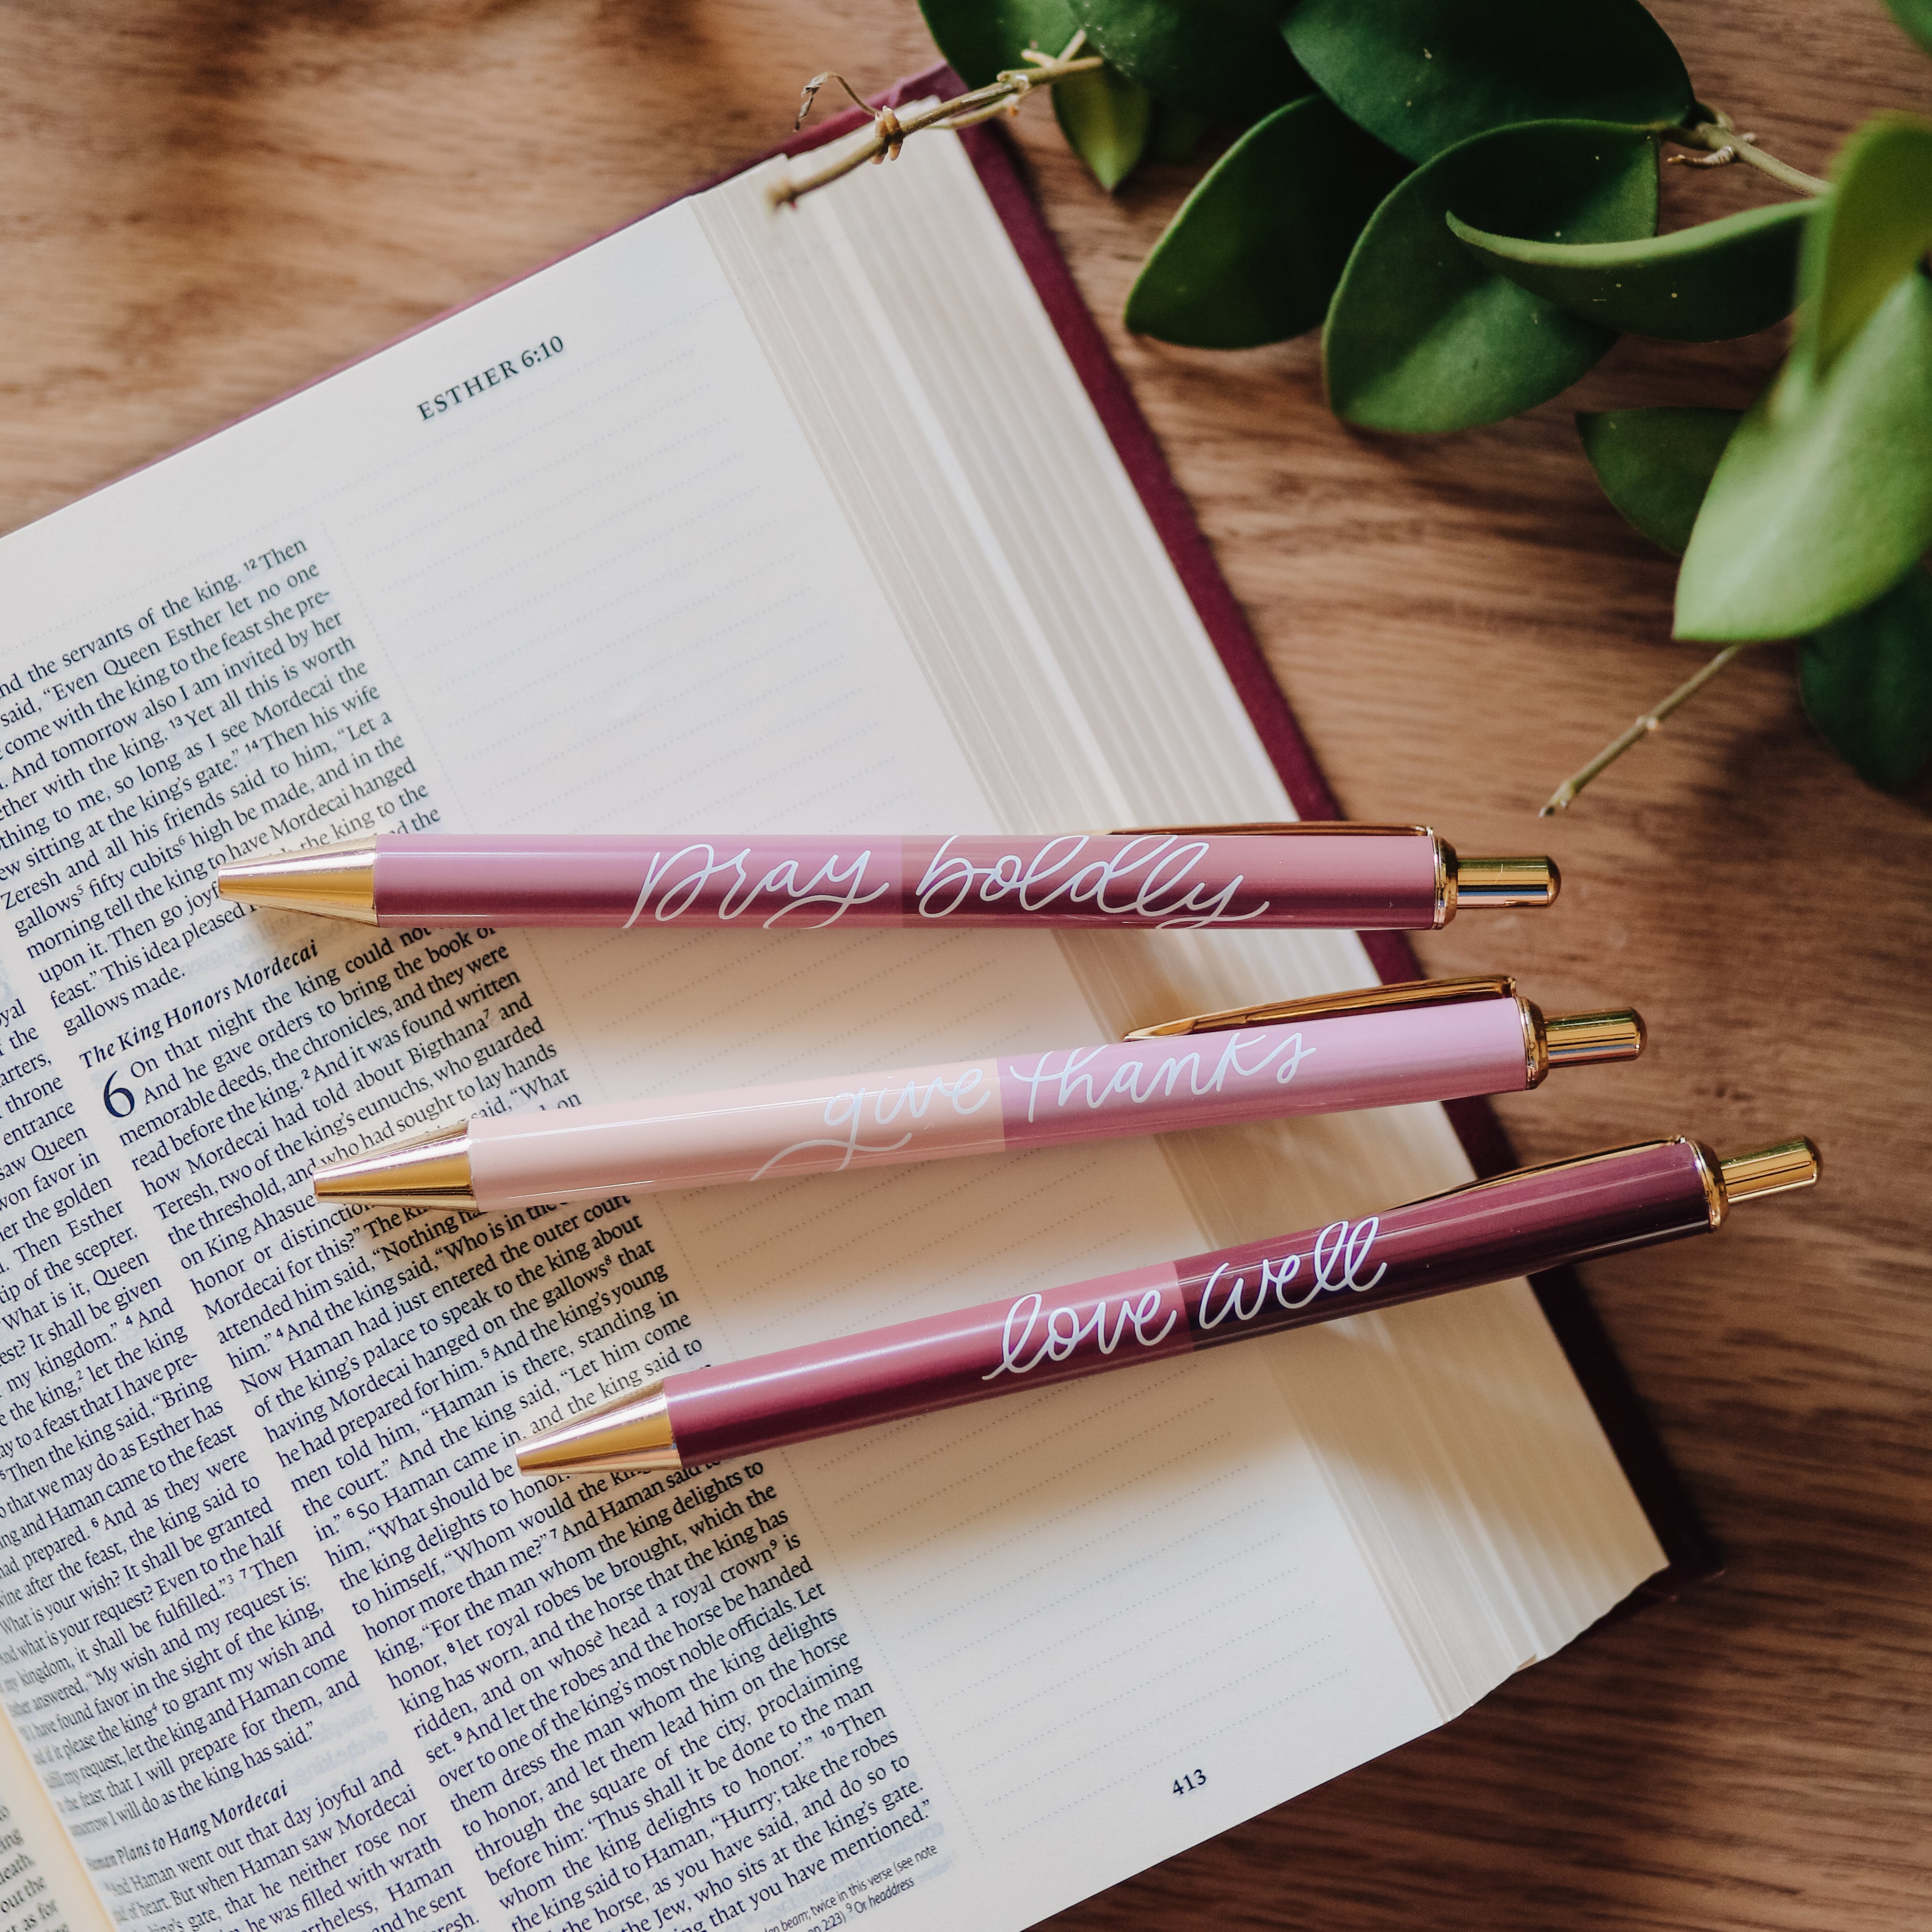 The Daily Grace Co. - Get a FREE Bible Pen Set!!! With every order of $30  or more you can get a FREE set of our favorite colored Bible pens! These are